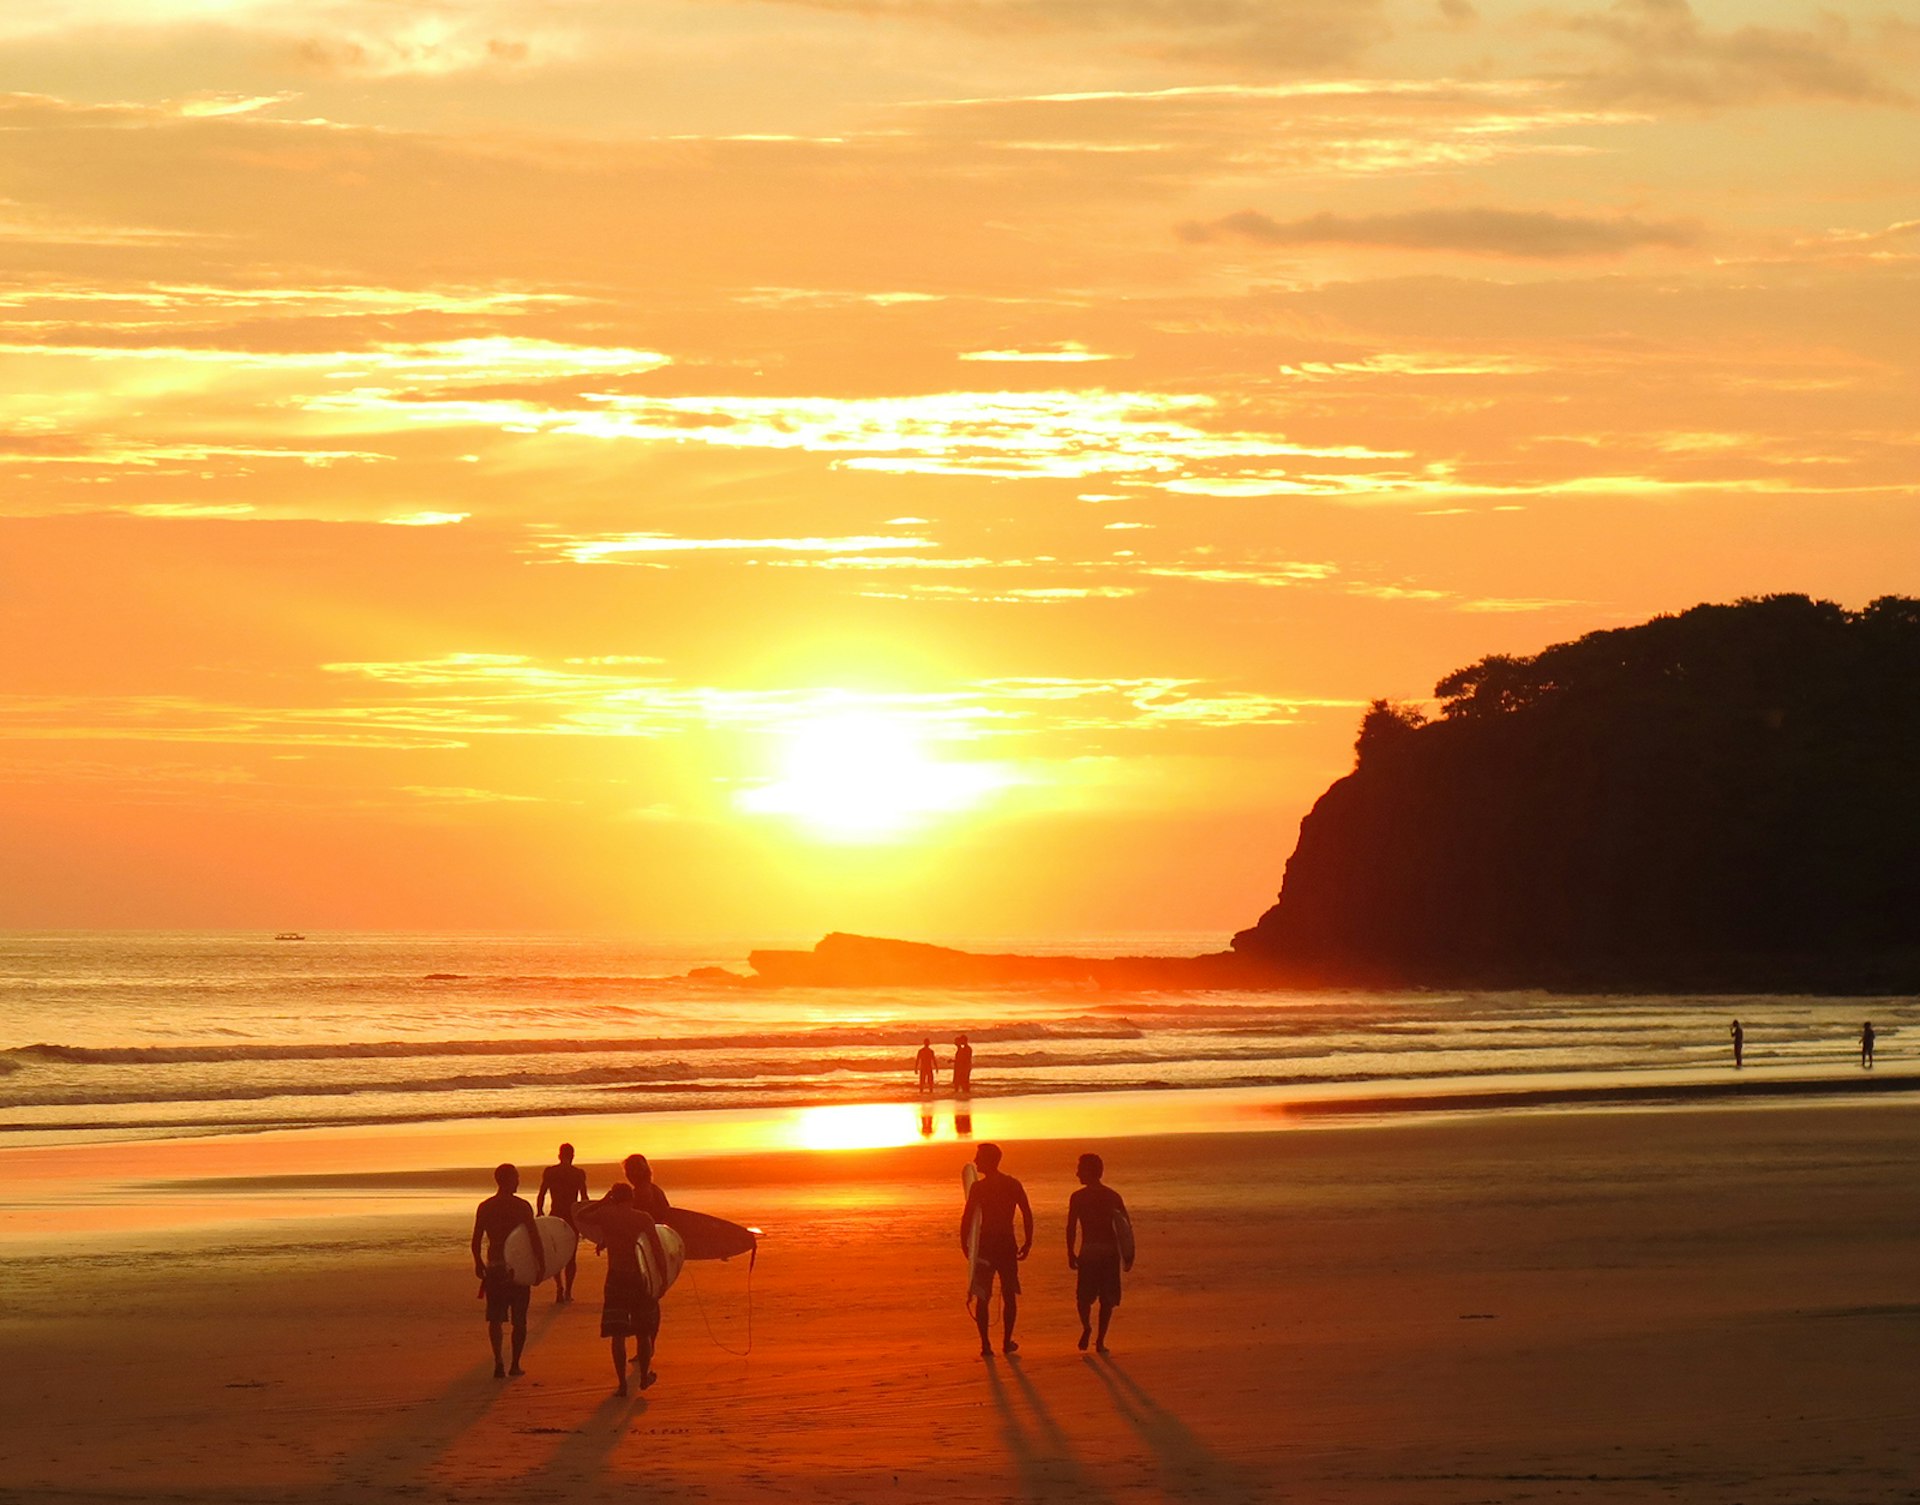 Features - Surfers and beach goers gaze at the golden orange sunset